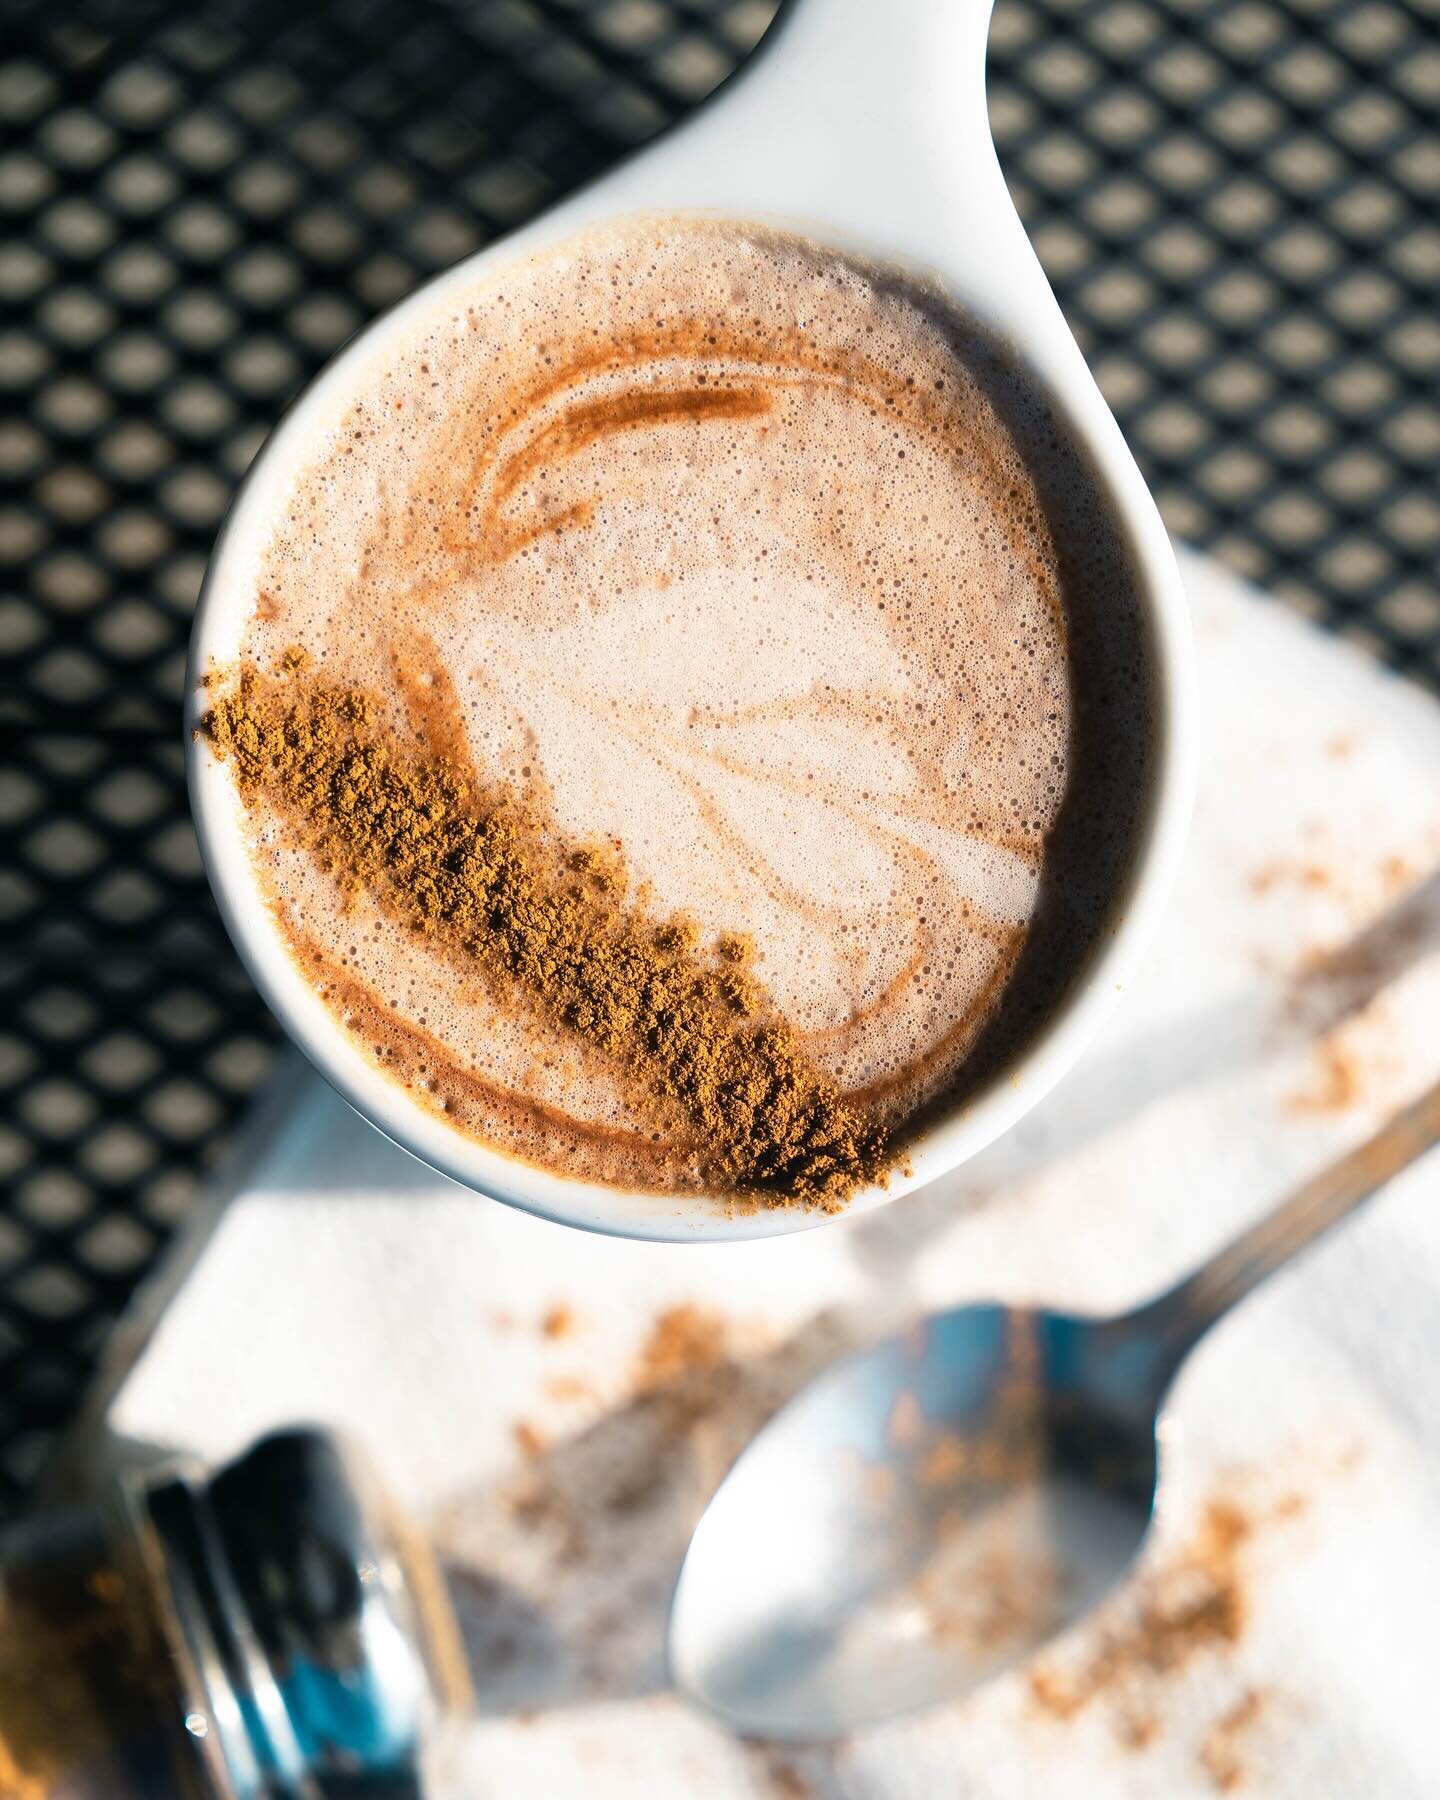 Can I have all the coffee today? 😅 It&rsquo;s a new week! Starting off this Monday wishing I was at @phoenixcoffeeco. Here are a few of our favorite coffee shots we took for Phoenix Coffee during our time shooting social media content for them! Whic